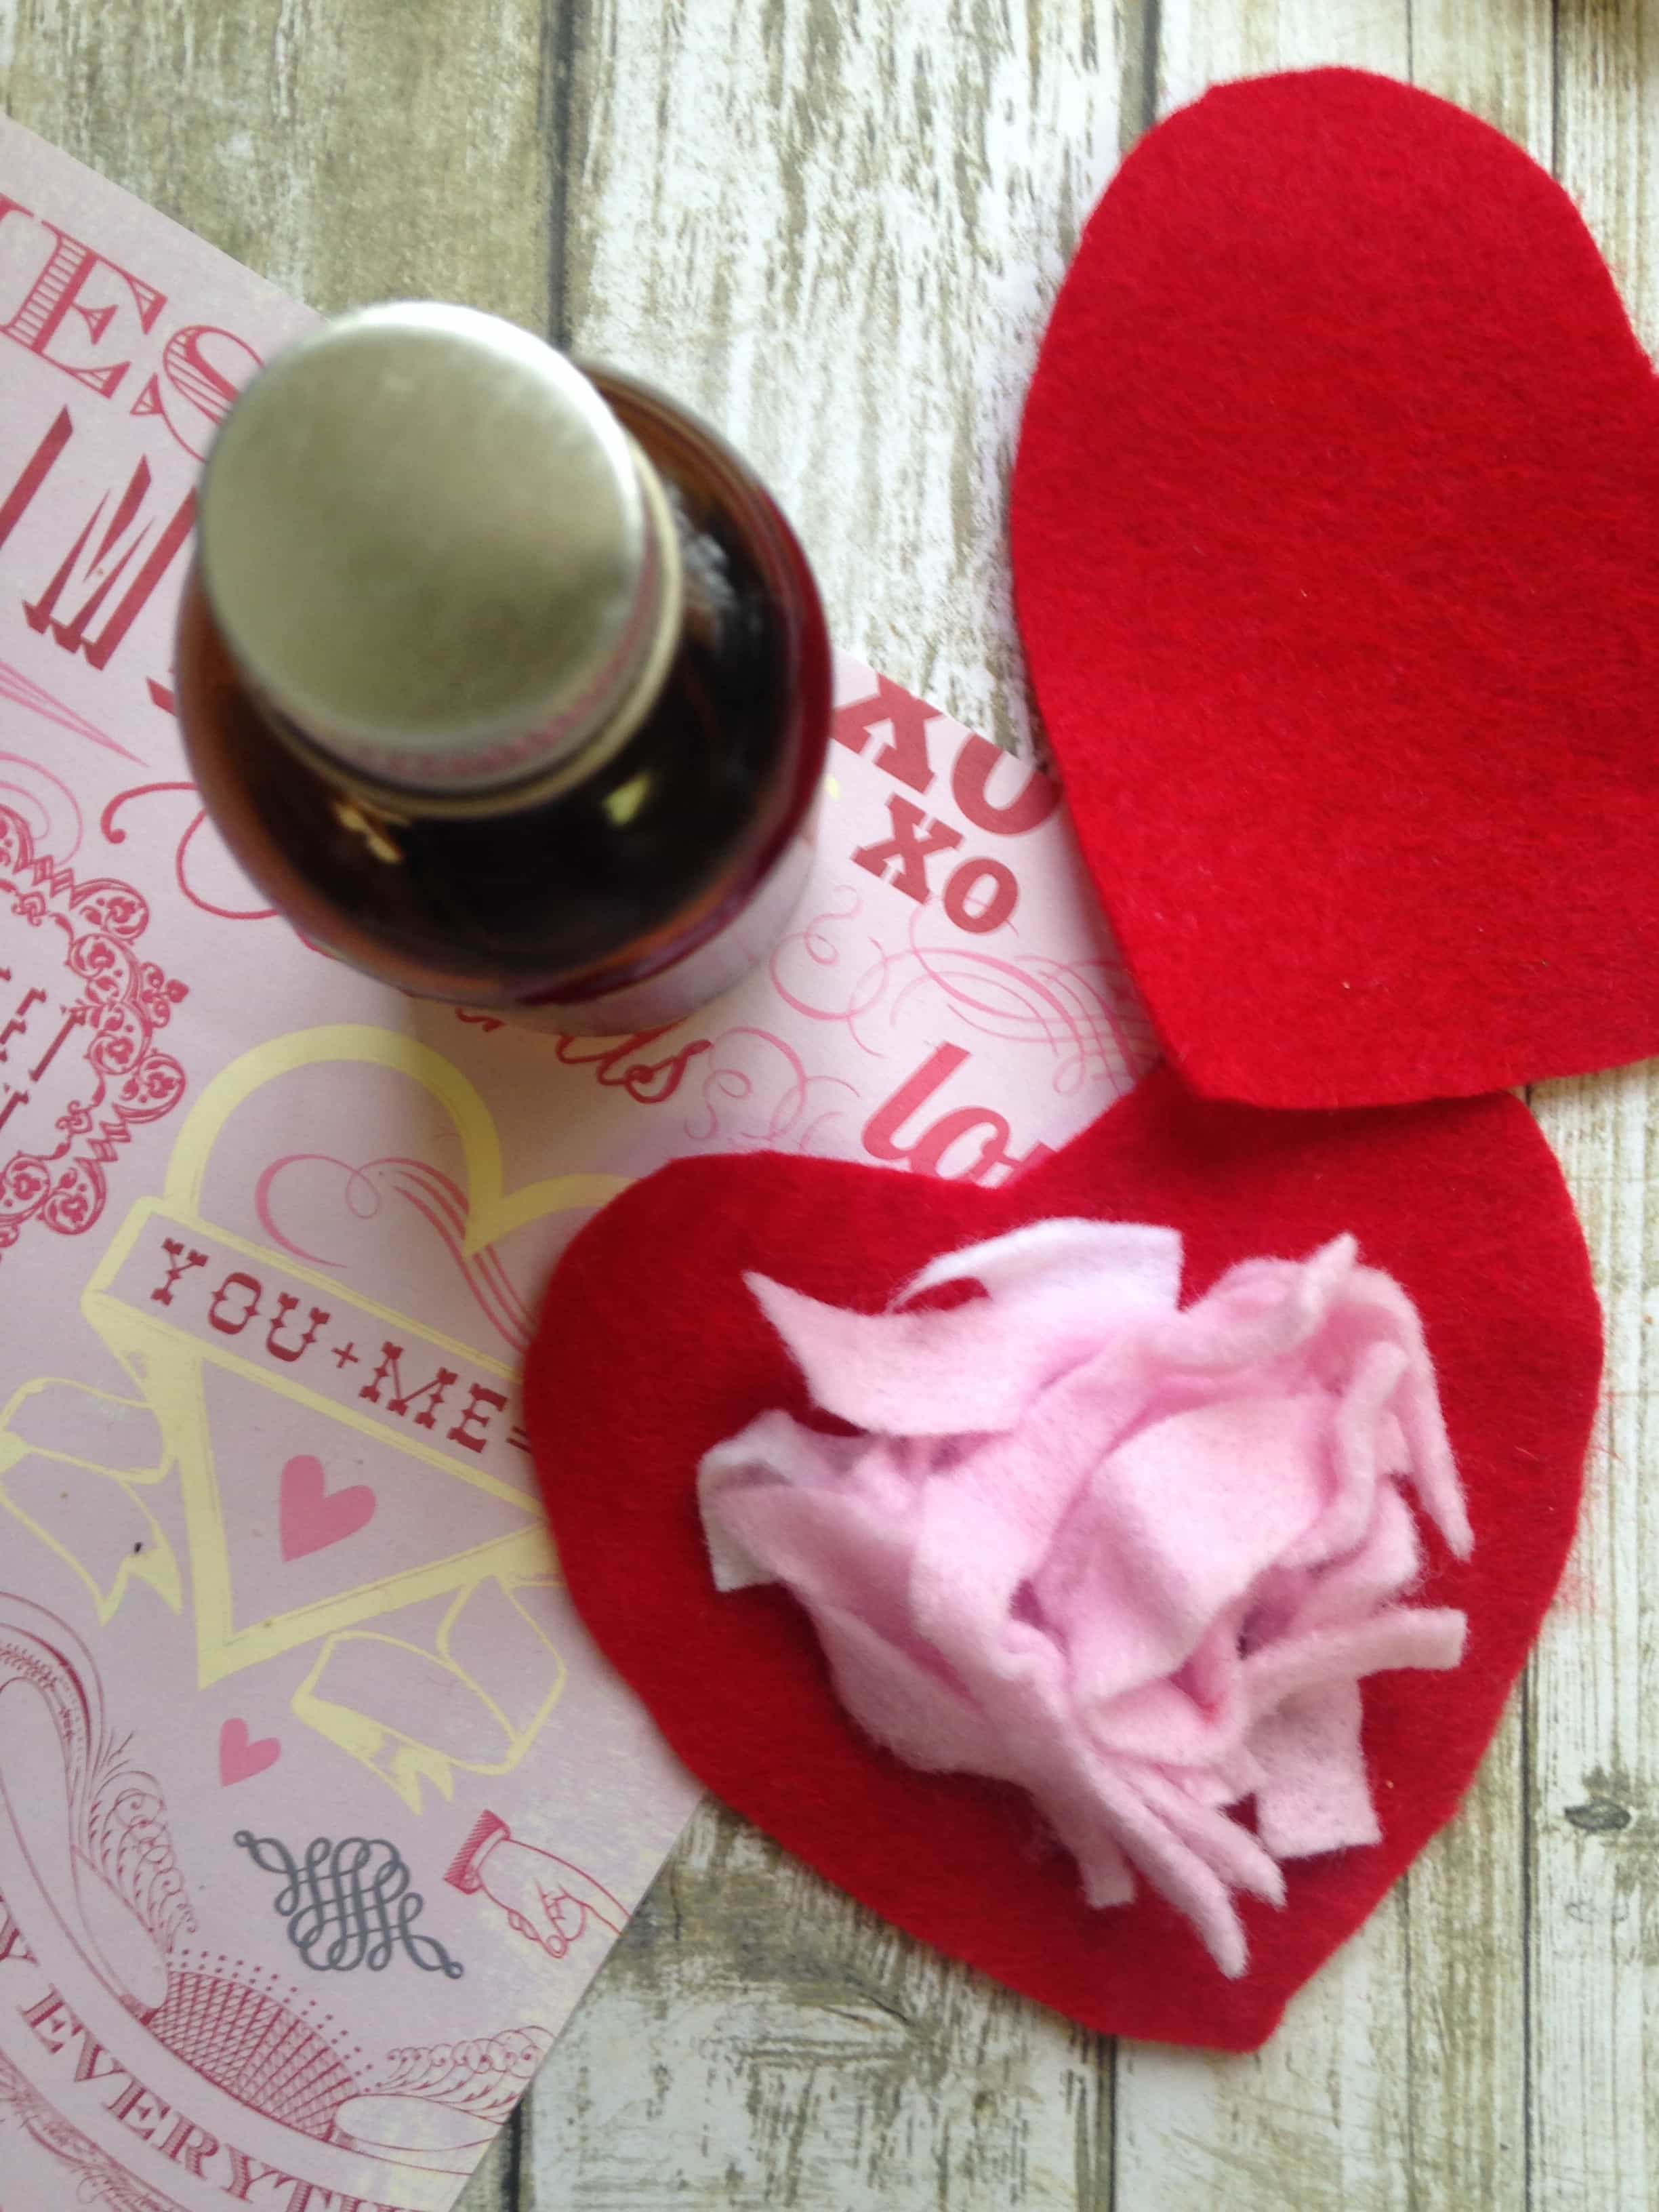 Stuff the heart with felt scented with essential oils